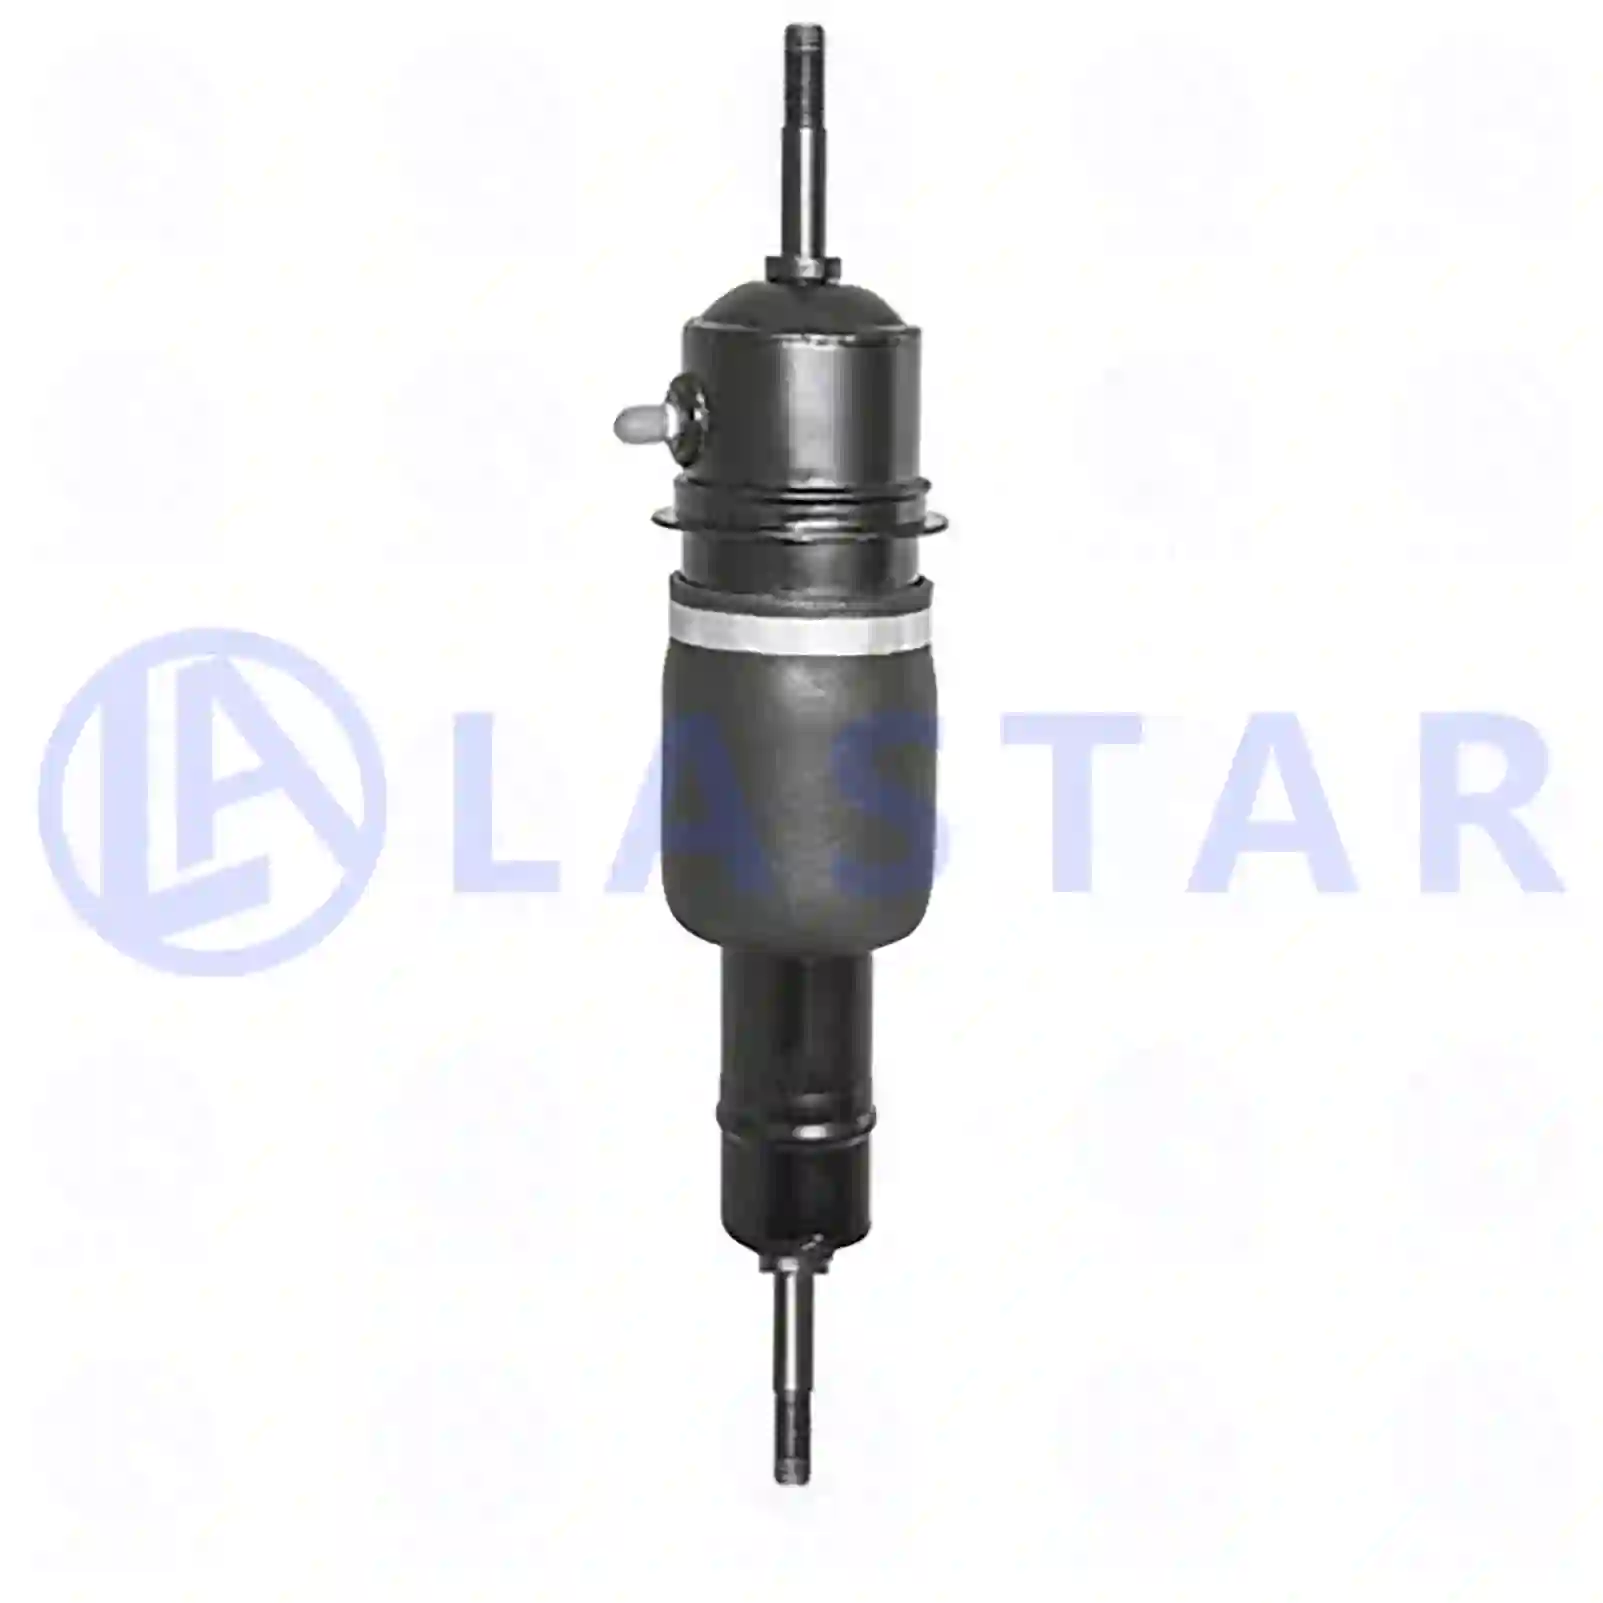 Cabin shock absorber, 77735715, 1089009, , , , ||  77735715 Lastar Spare Part | Truck Spare Parts, Auotomotive Spare Parts Cabin shock absorber, 77735715, 1089009, , , , ||  77735715 Lastar Spare Part | Truck Spare Parts, Auotomotive Spare Parts